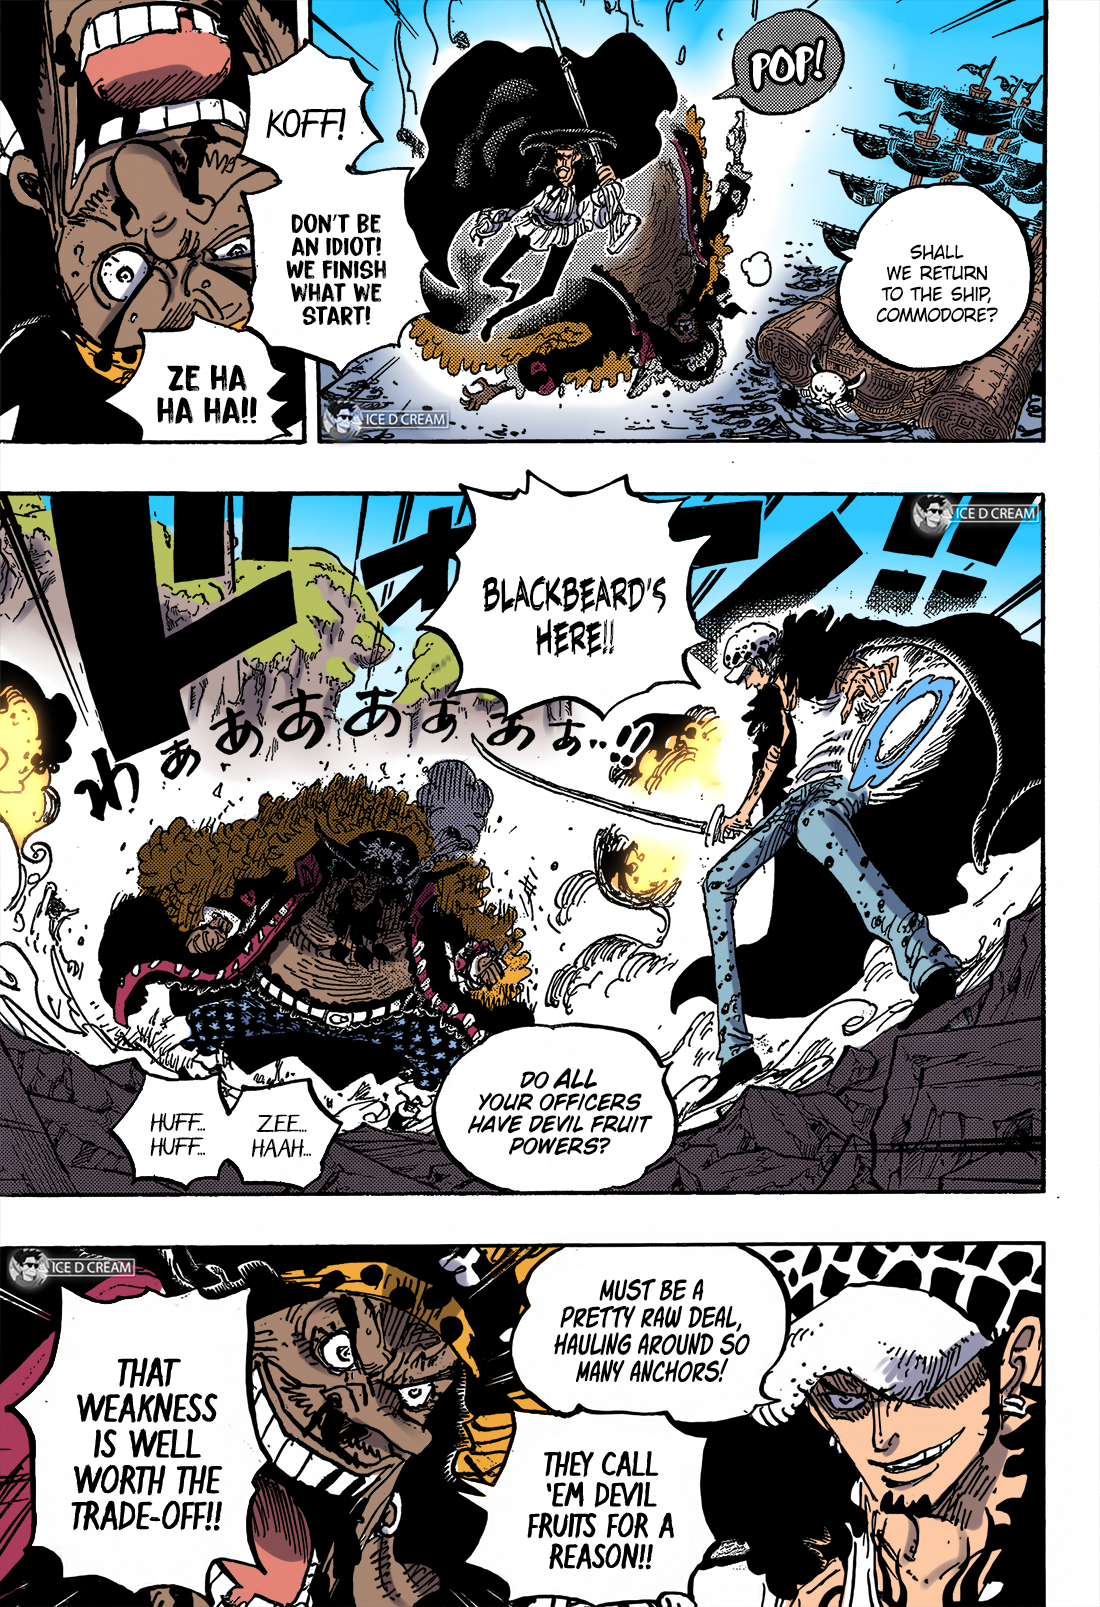 One Piece Chapter 1064 Colored full Egghead Research Stratum